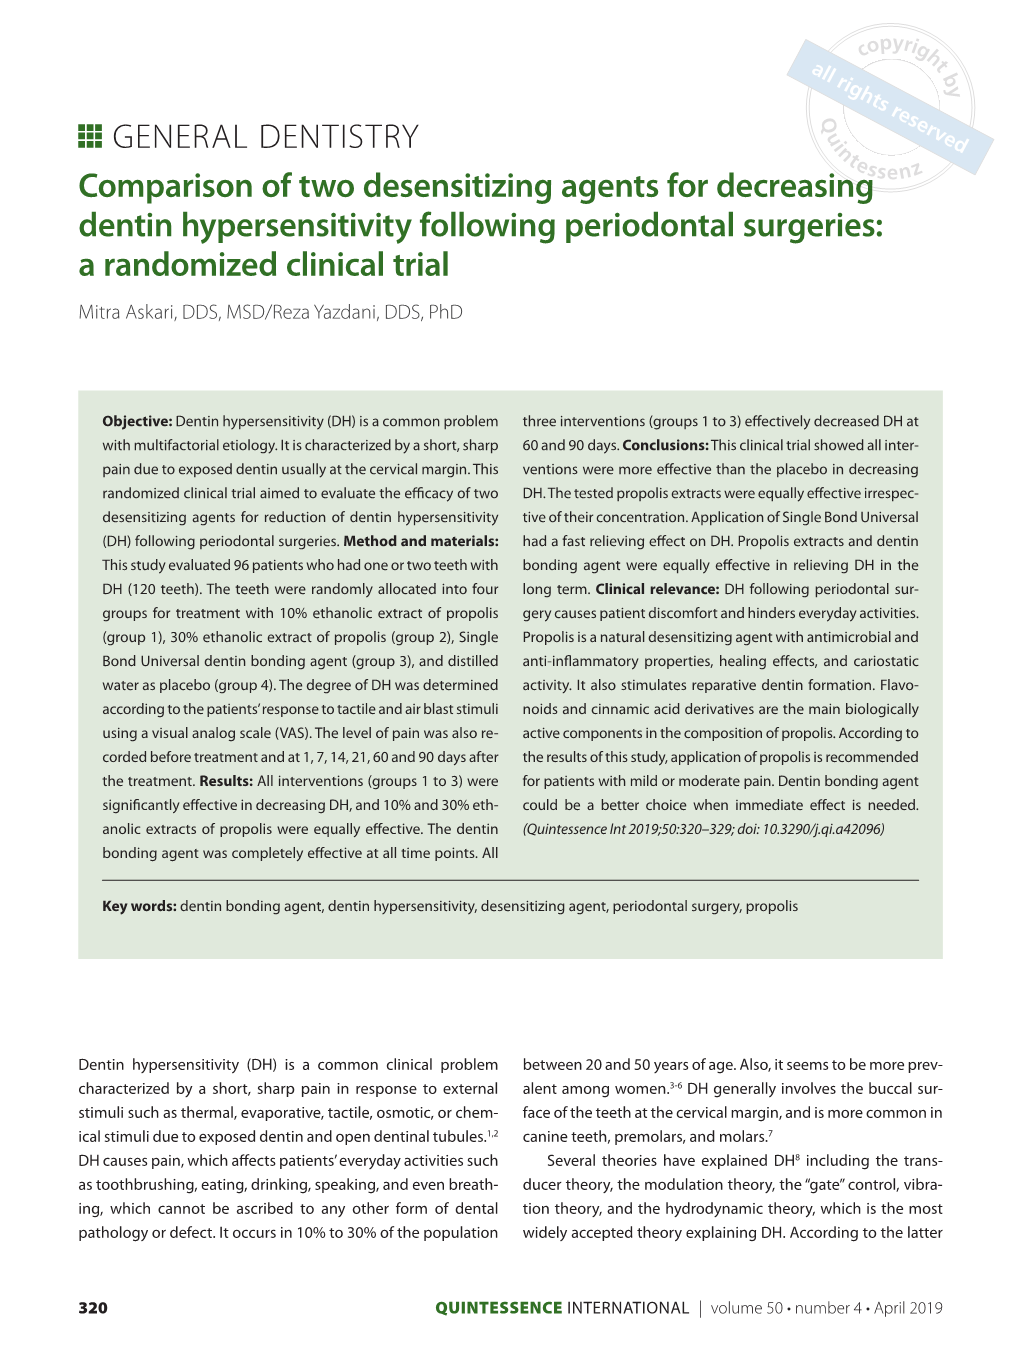 Comparison of Two Desensitizing Agents for Decreasing Dentin Hypersensitivity Following Periodontal Surgeries